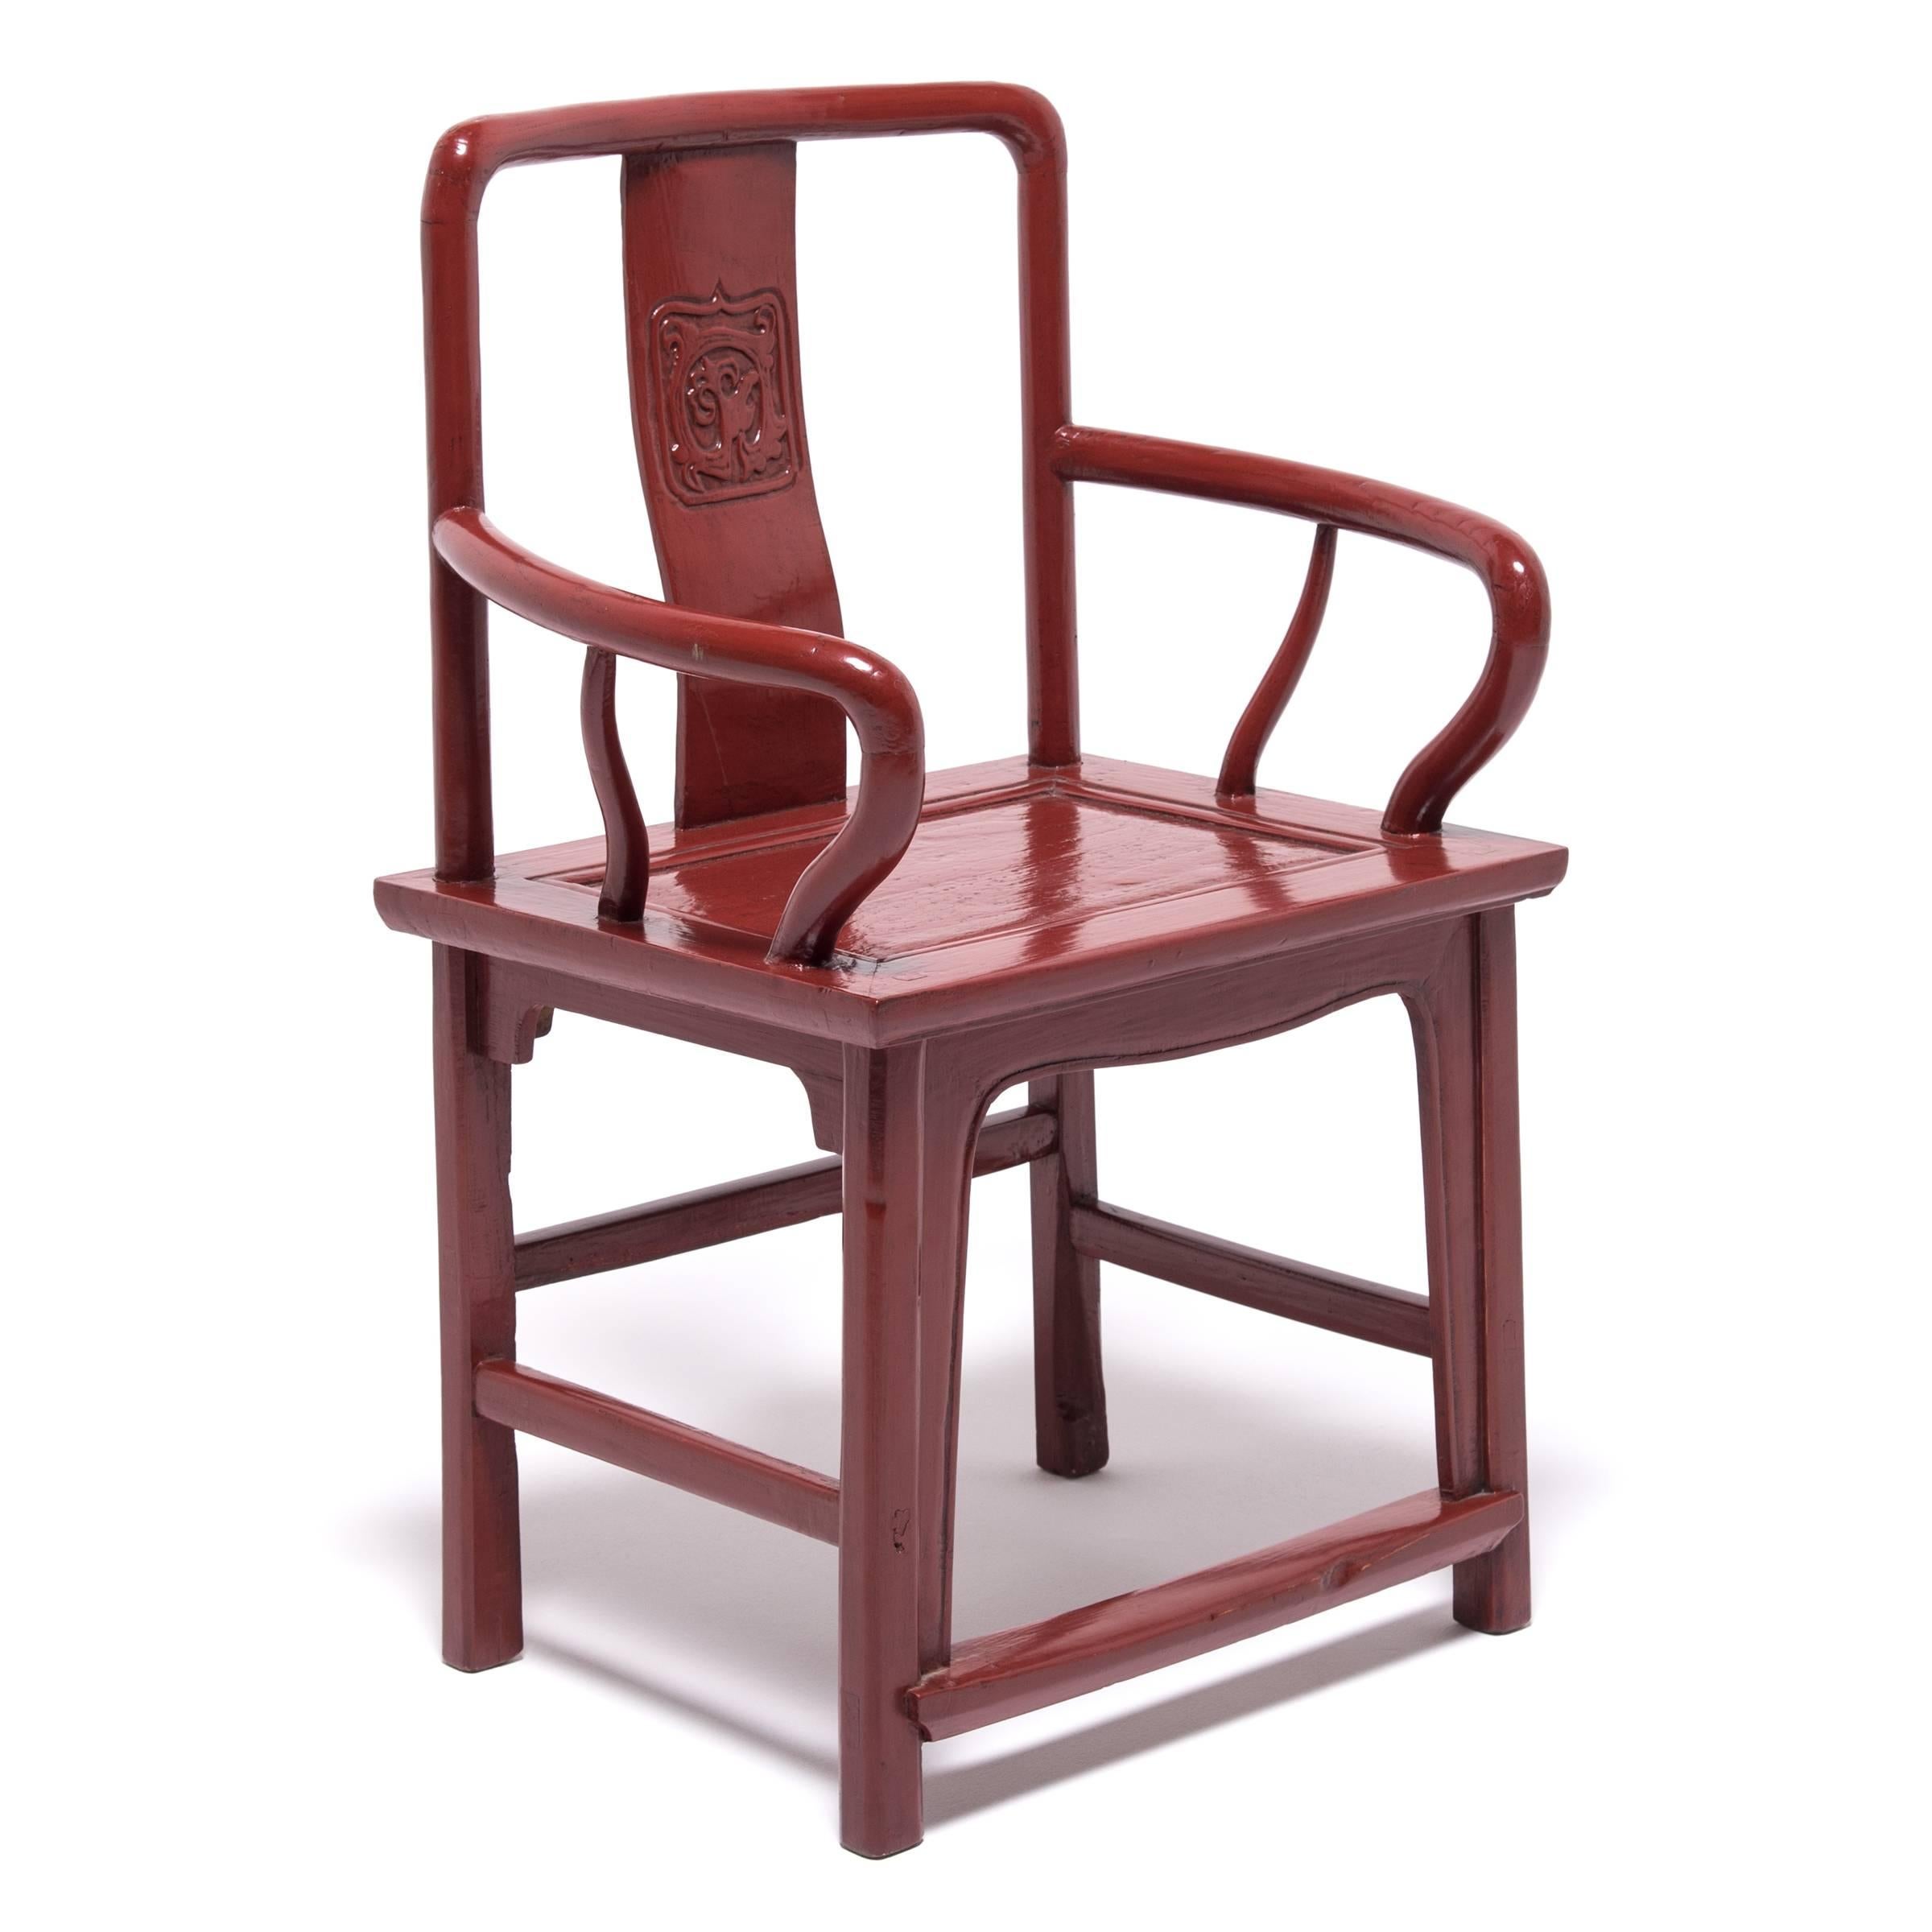 Chinese Red Lacquer Official's Chair, c. 1900 In Good Condition For Sale In Chicago, IL